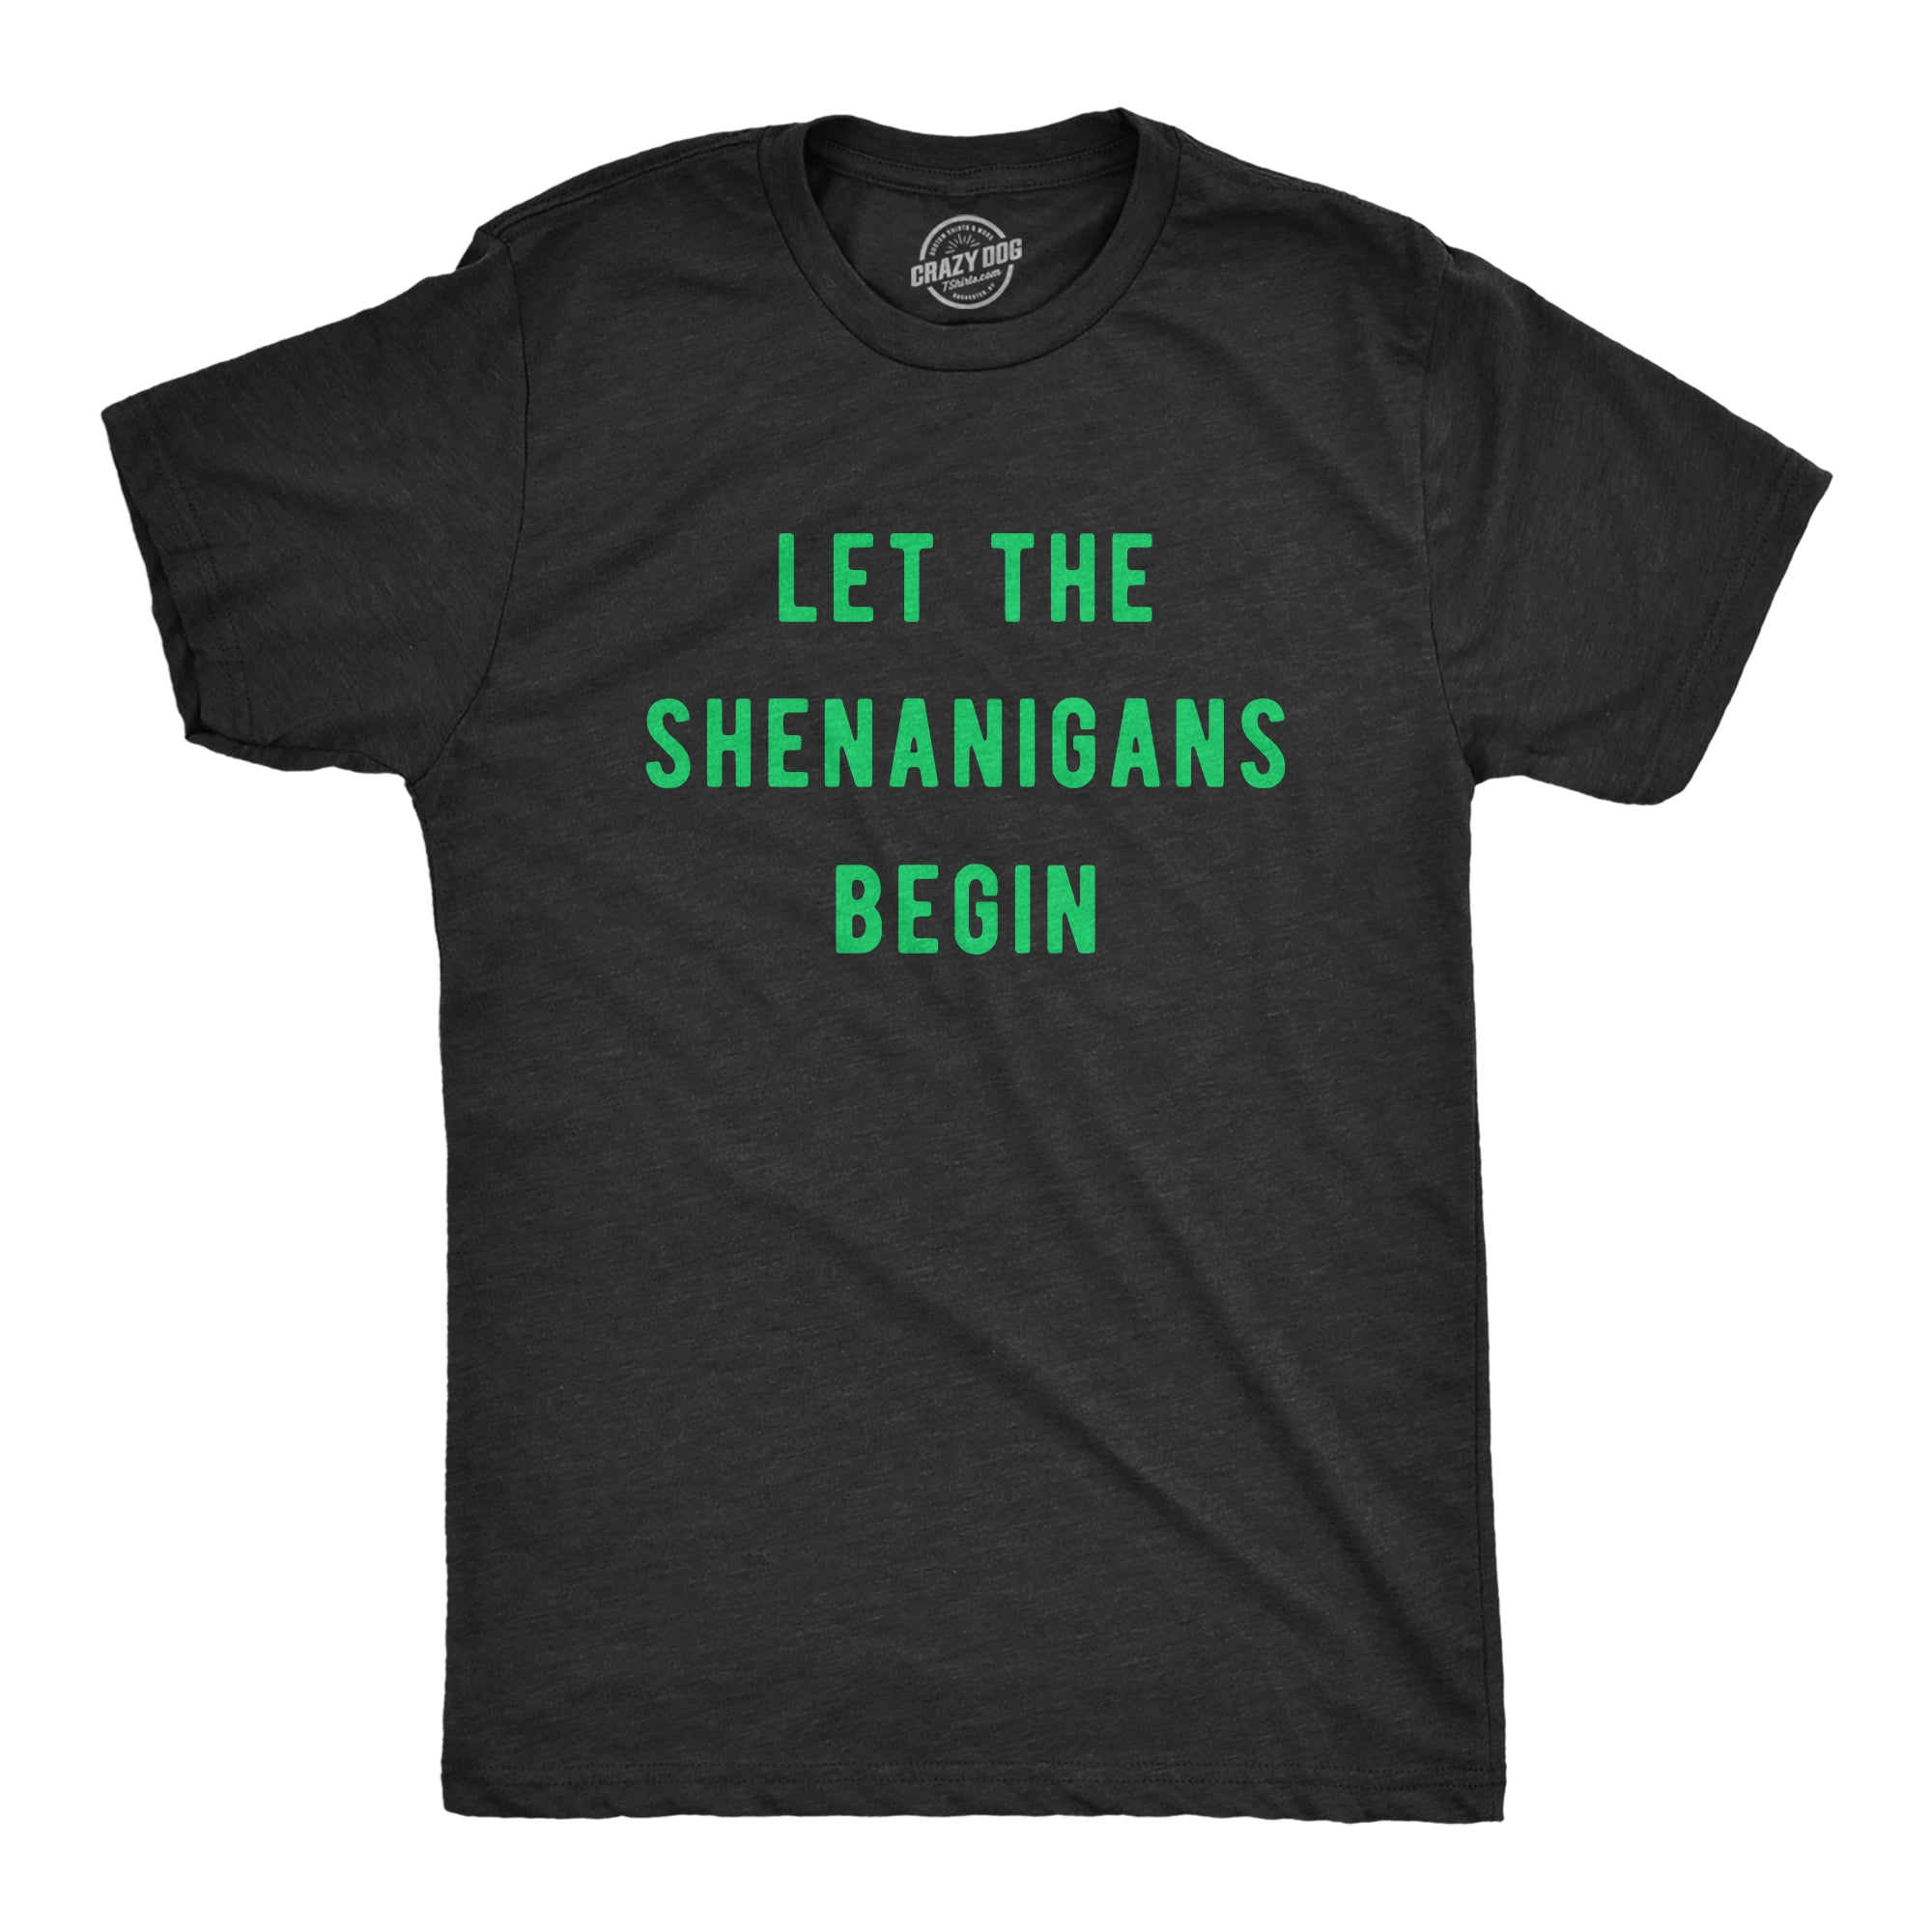 Funny Heather Black Let The Shenanigans Begin Mens T Shirt Nerdy Saint Patrick's Day Beer Tee